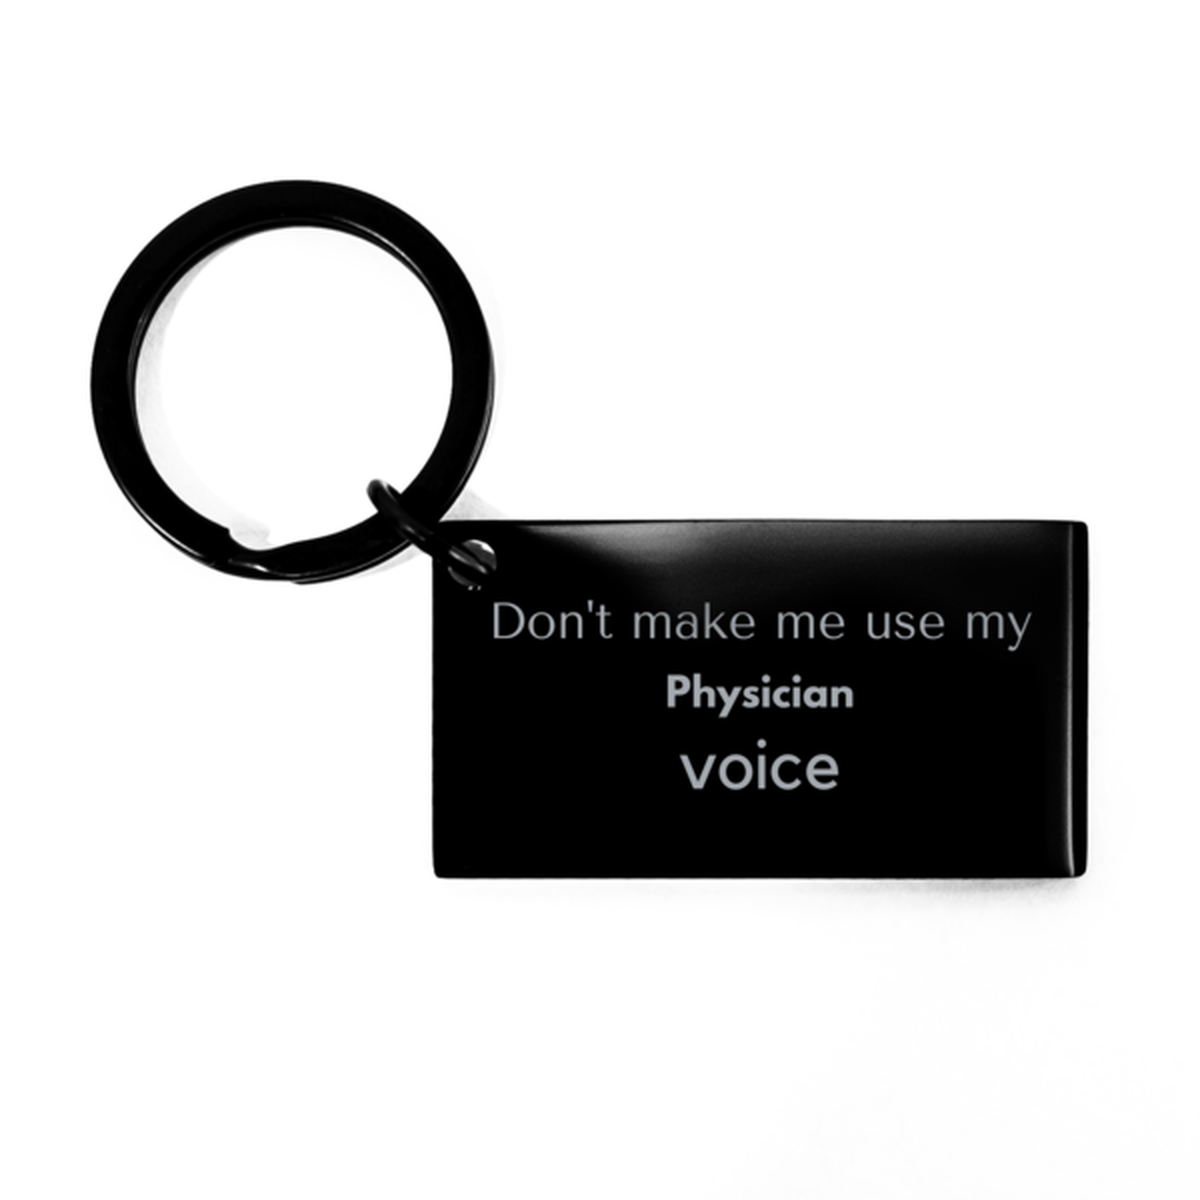 Don't make me use my Physician voice, Sarcasm Physician Gifts, Christmas Physician Keychain Birthday Unique Gifts For Physician Coworkers, Men, Women, Colleague, Friends